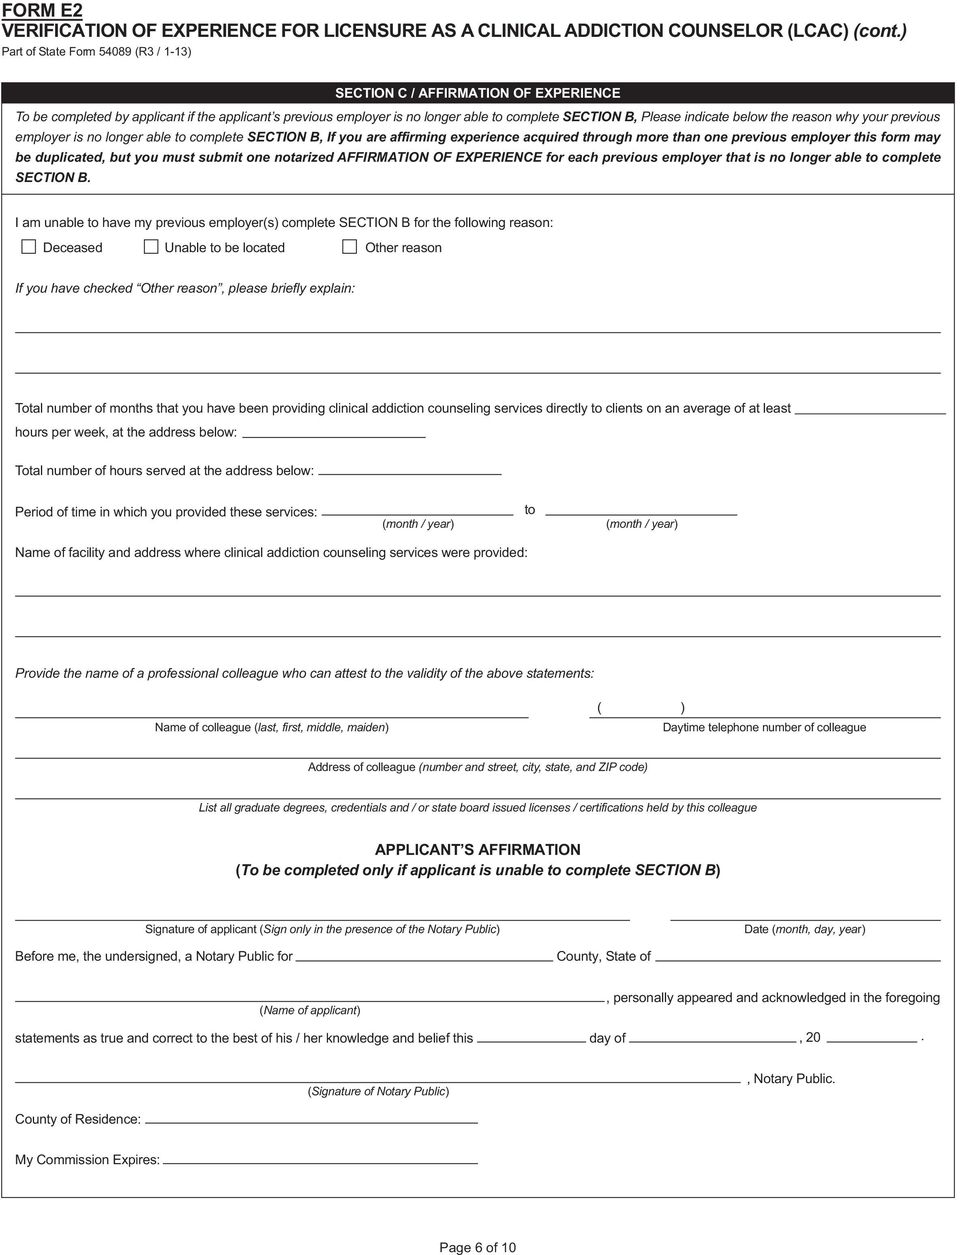 employer is no longer able to complete SECTION B, If you are affirming experience acquired through more than one previous employer this form may be duplicated, but you must submit one notarized